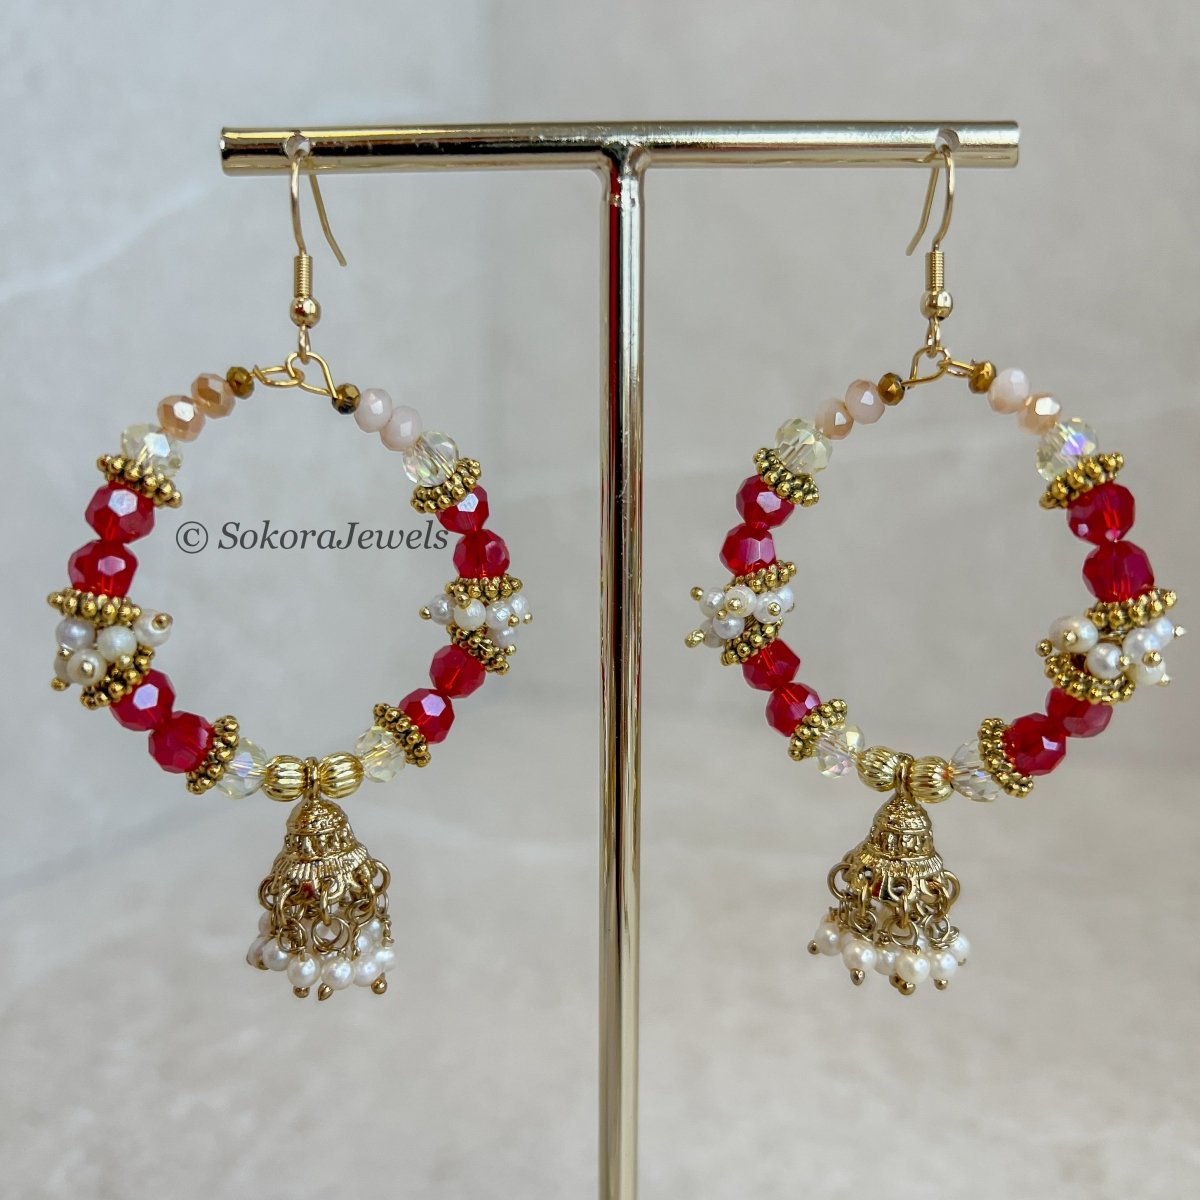 Red and Pink Hoops - SOKORA JEWELSRed and Pink Hoops